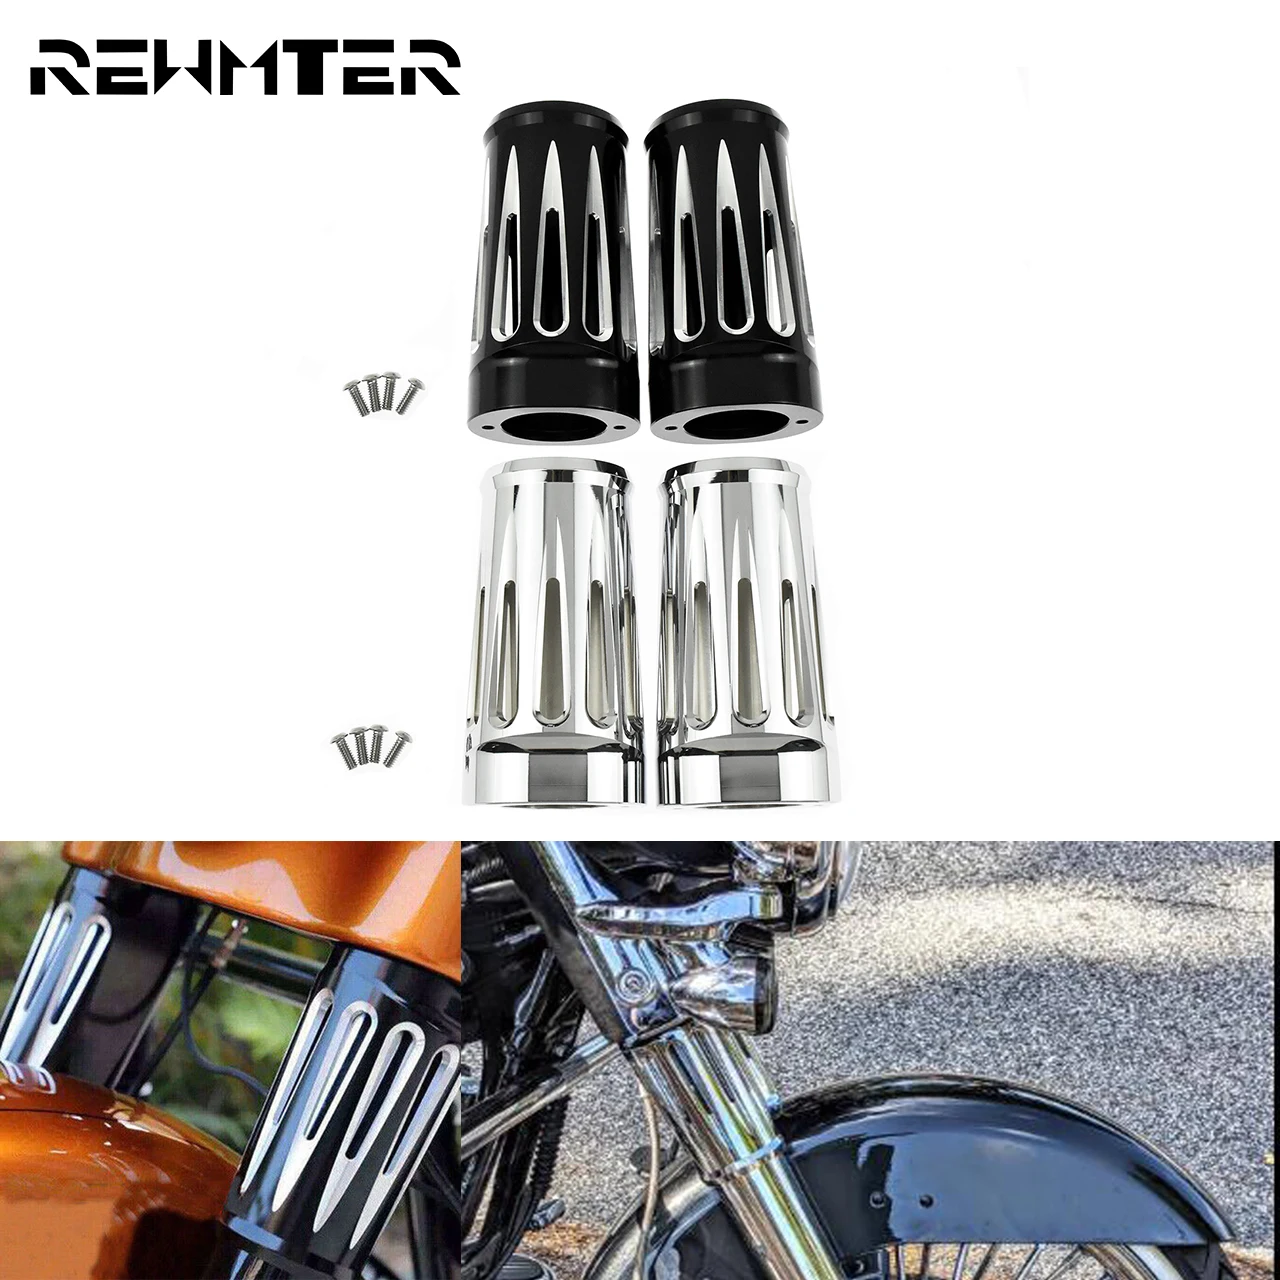 CHROME Gear FORK SLIDER CAN cover For Harley Touring Softail street road king electra glide 